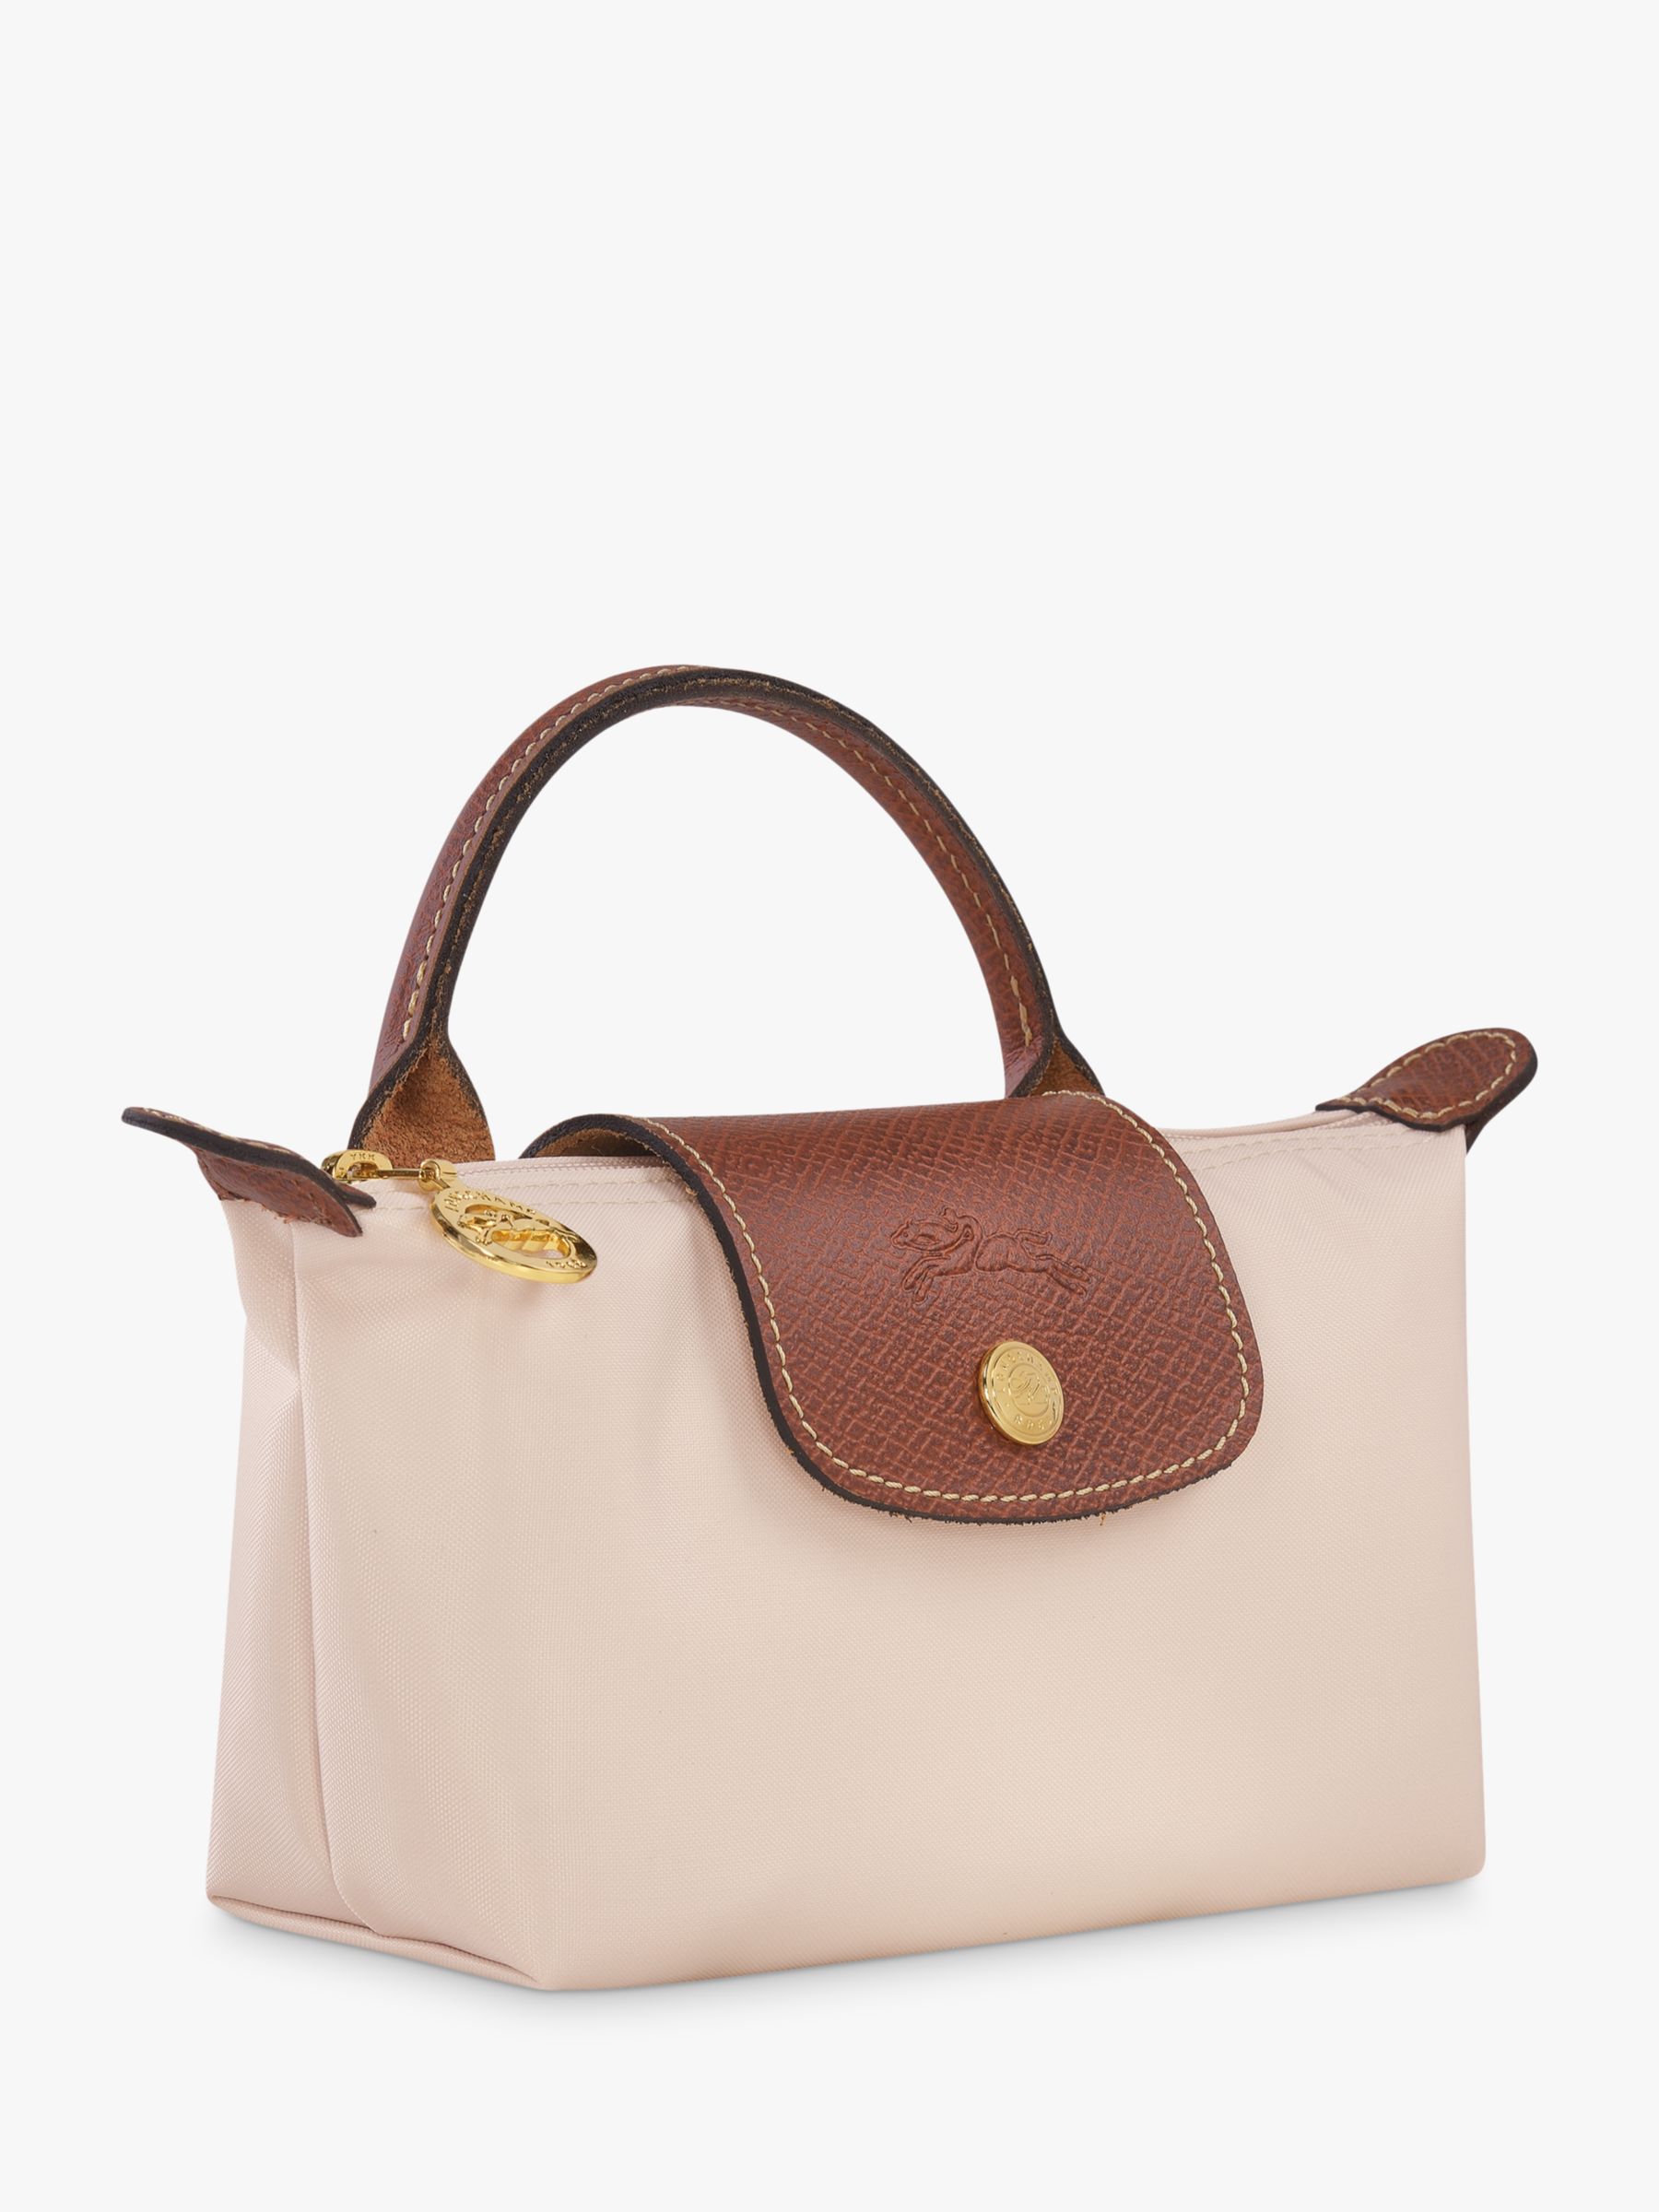 THE BAG REVIEW: LONGCHAMP LE PLIAGE POUCH WITH HANDLE IN GRENADINE